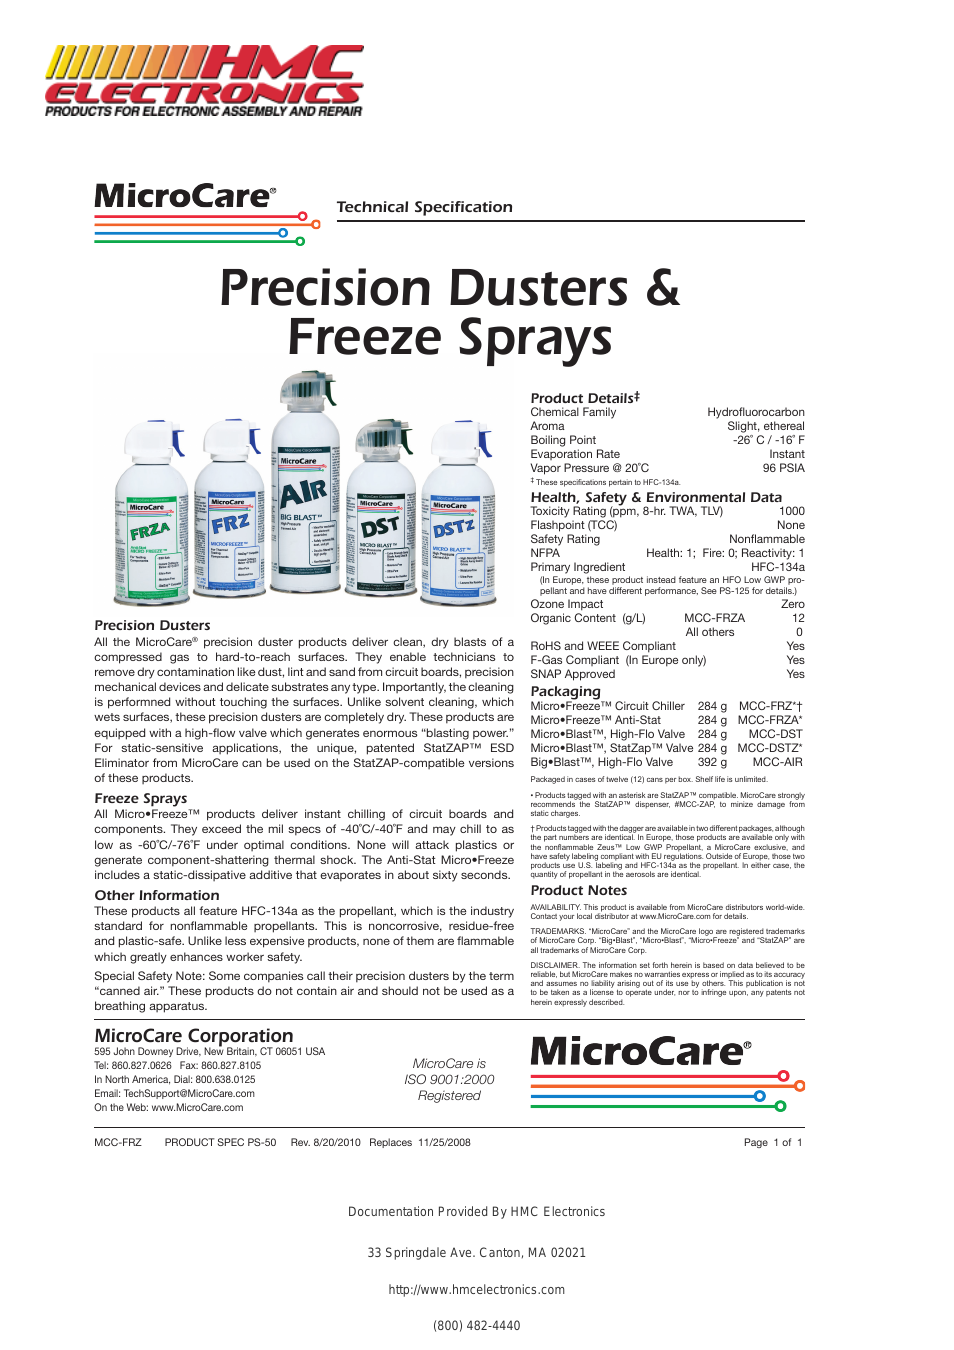 MCC-DST14A Microcare Precision Duster, Big Blast Canned Air